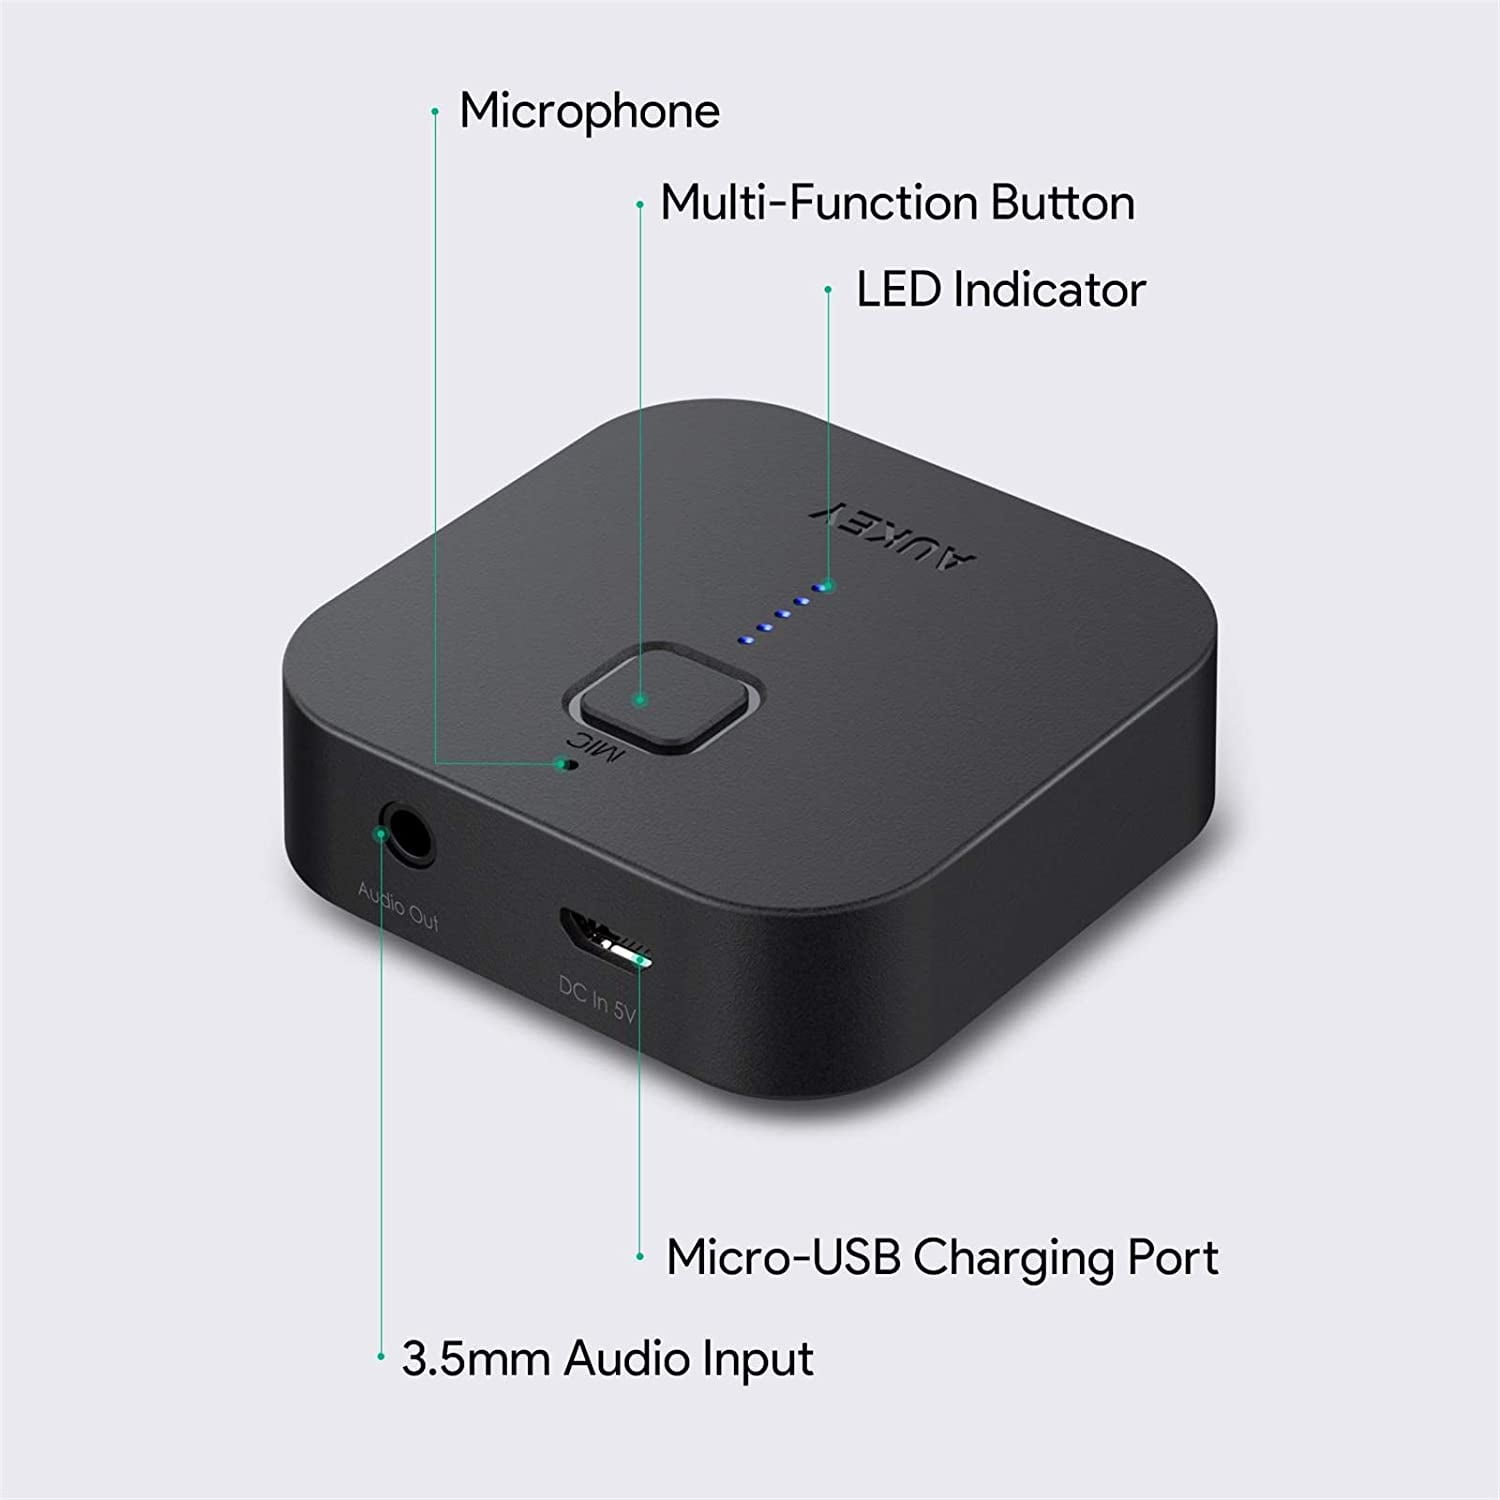 AUKEY Bluetooth Receiver V4.1 Wireless Audio Music Adapter A2DP Hands-free Calling and 3.5mm stereo for Home and Car Audio System - Walmart.com